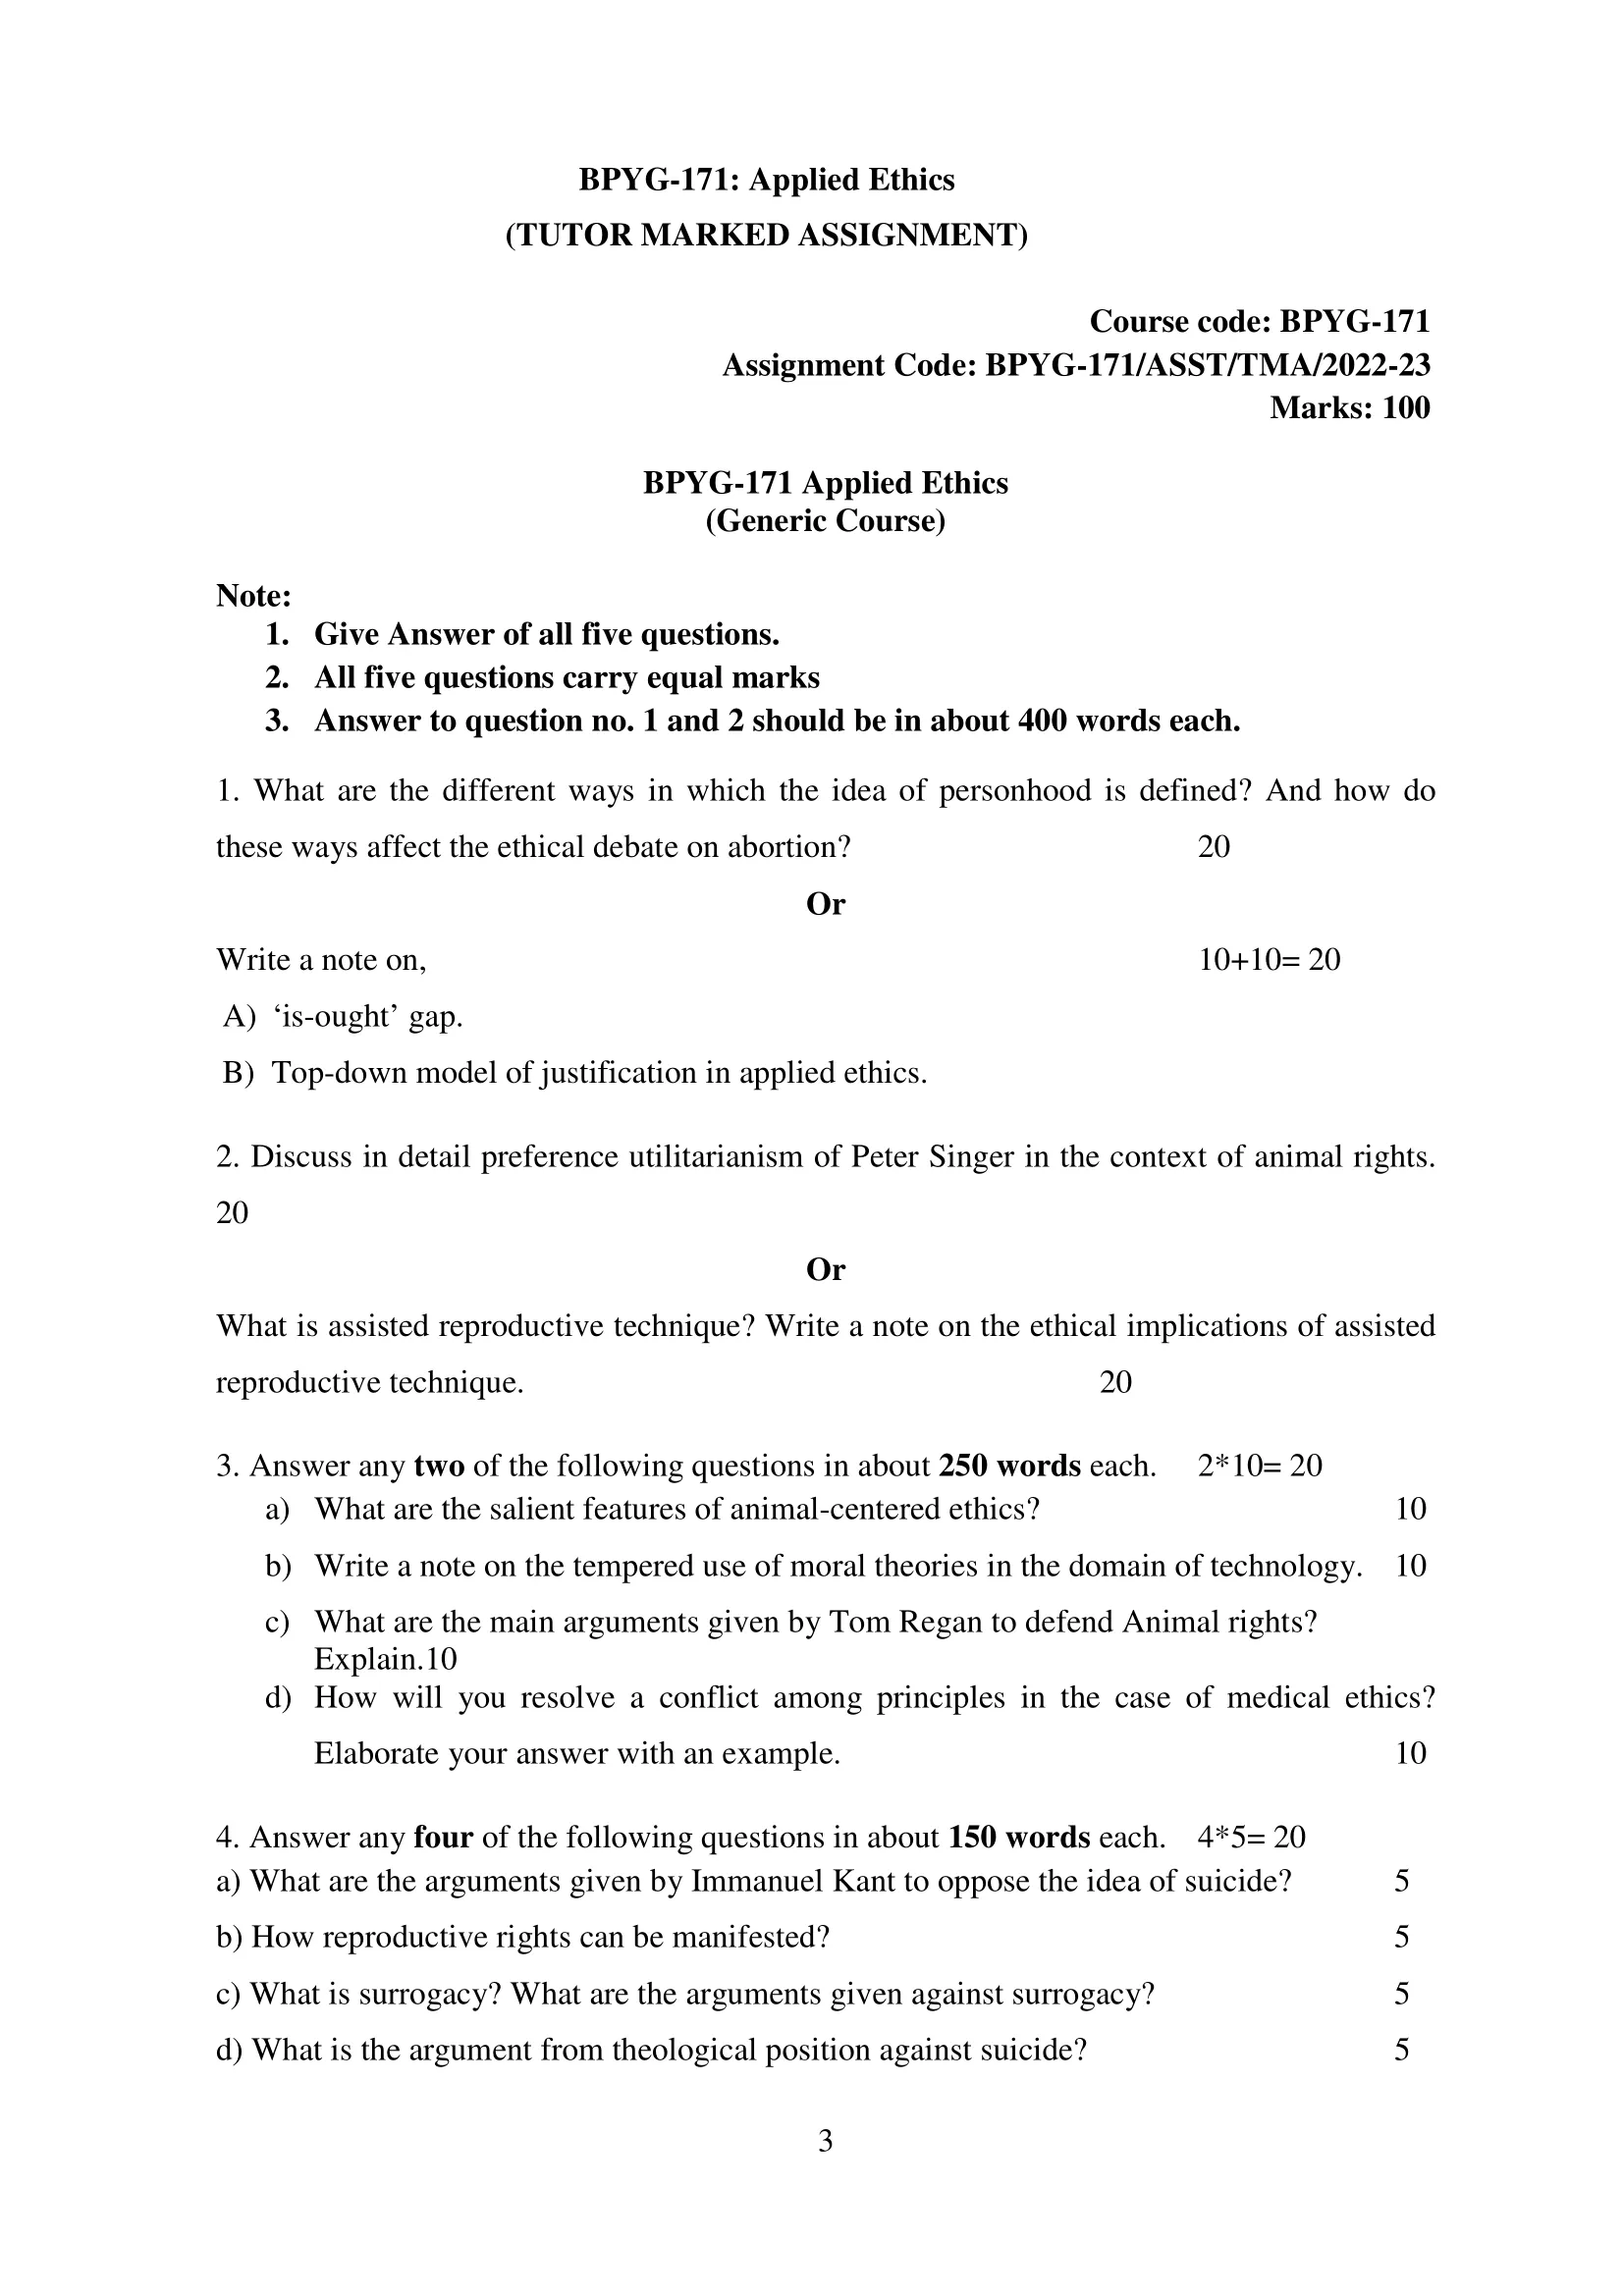 IGNOU BPYG-171-Solved Assignment 2022-2023 Applied Ethics 